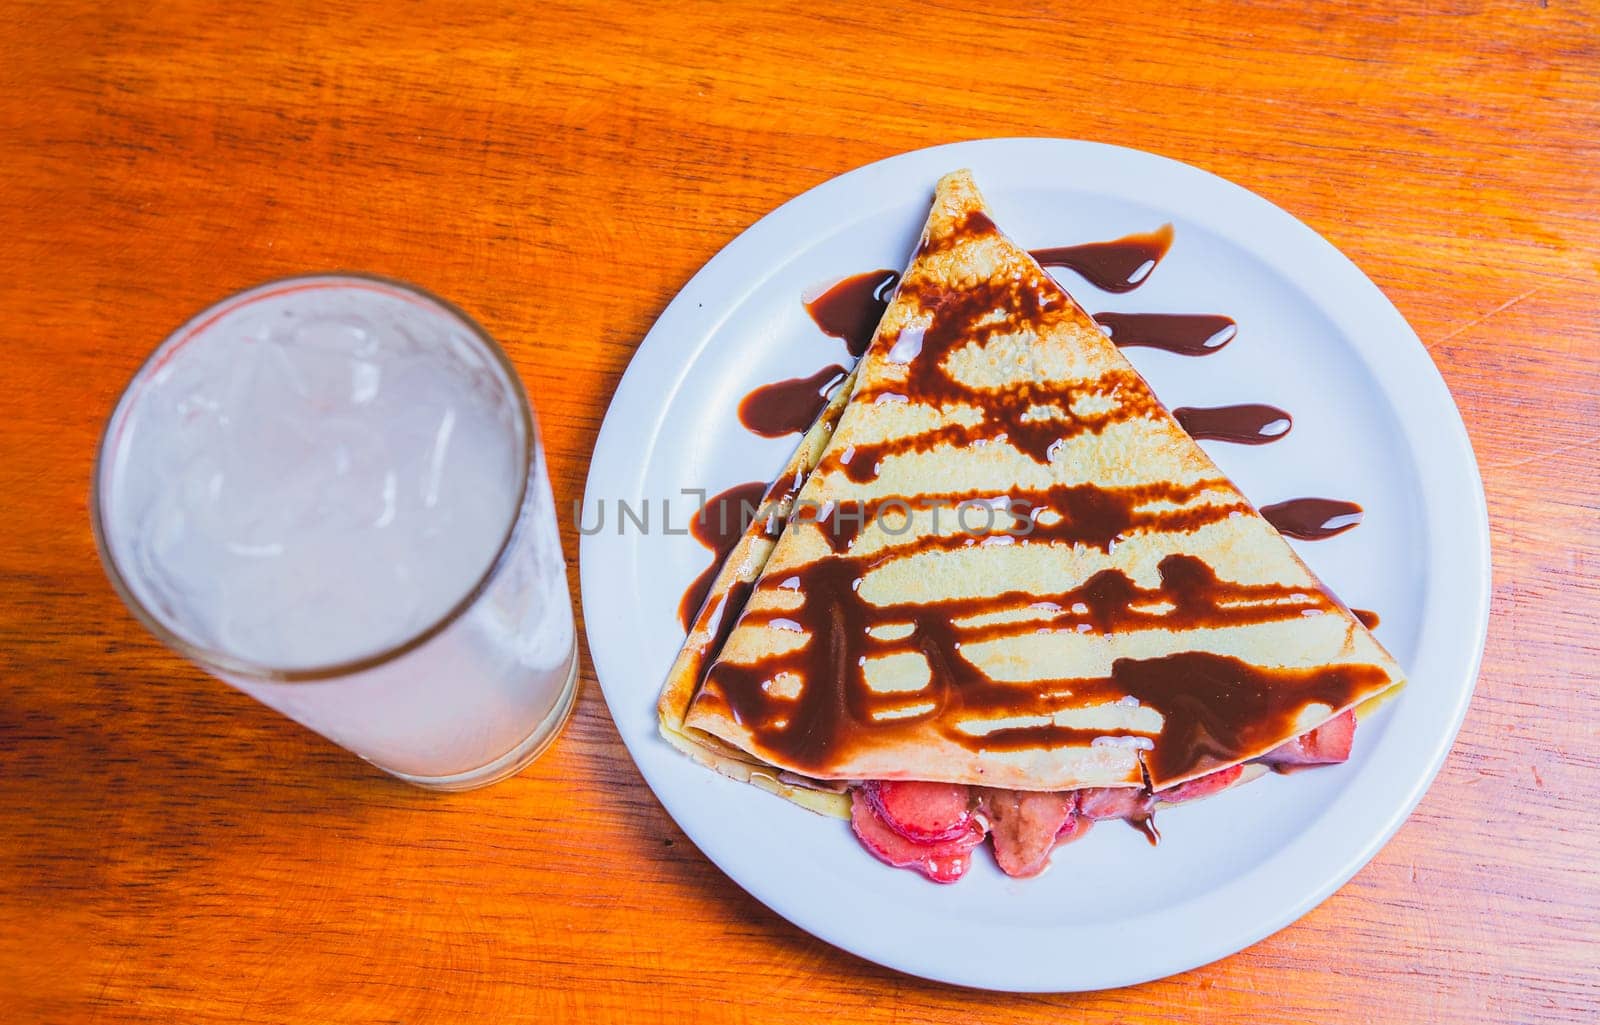 Crepe with chocolate cream and strawberry with drink on the table. Sweet strawberry crepe with chocolate cream and lemonade on table by isaiphoto